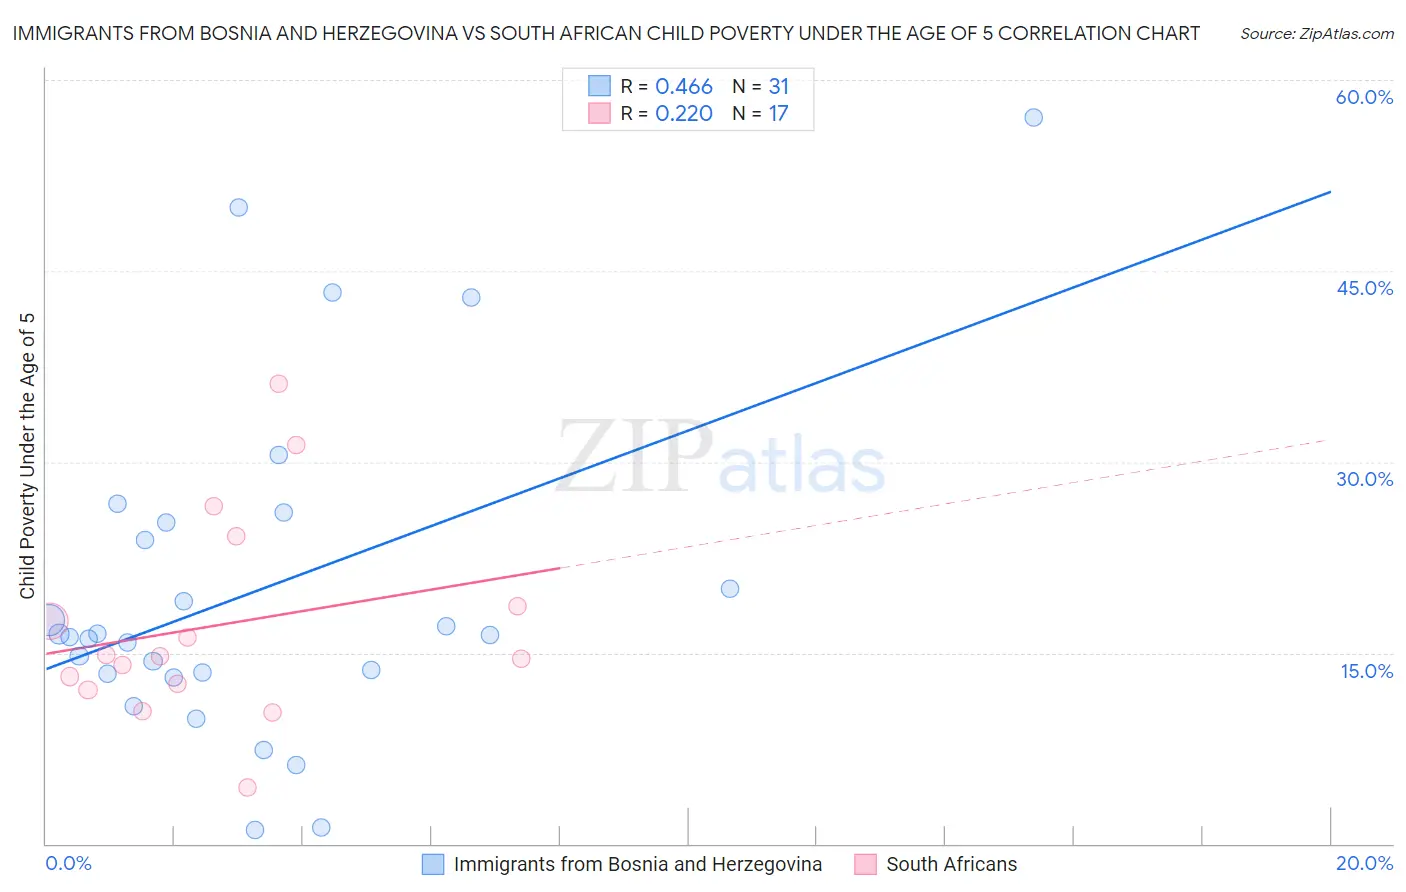 Immigrants from Bosnia and Herzegovina vs South African Child Poverty Under the Age of 5